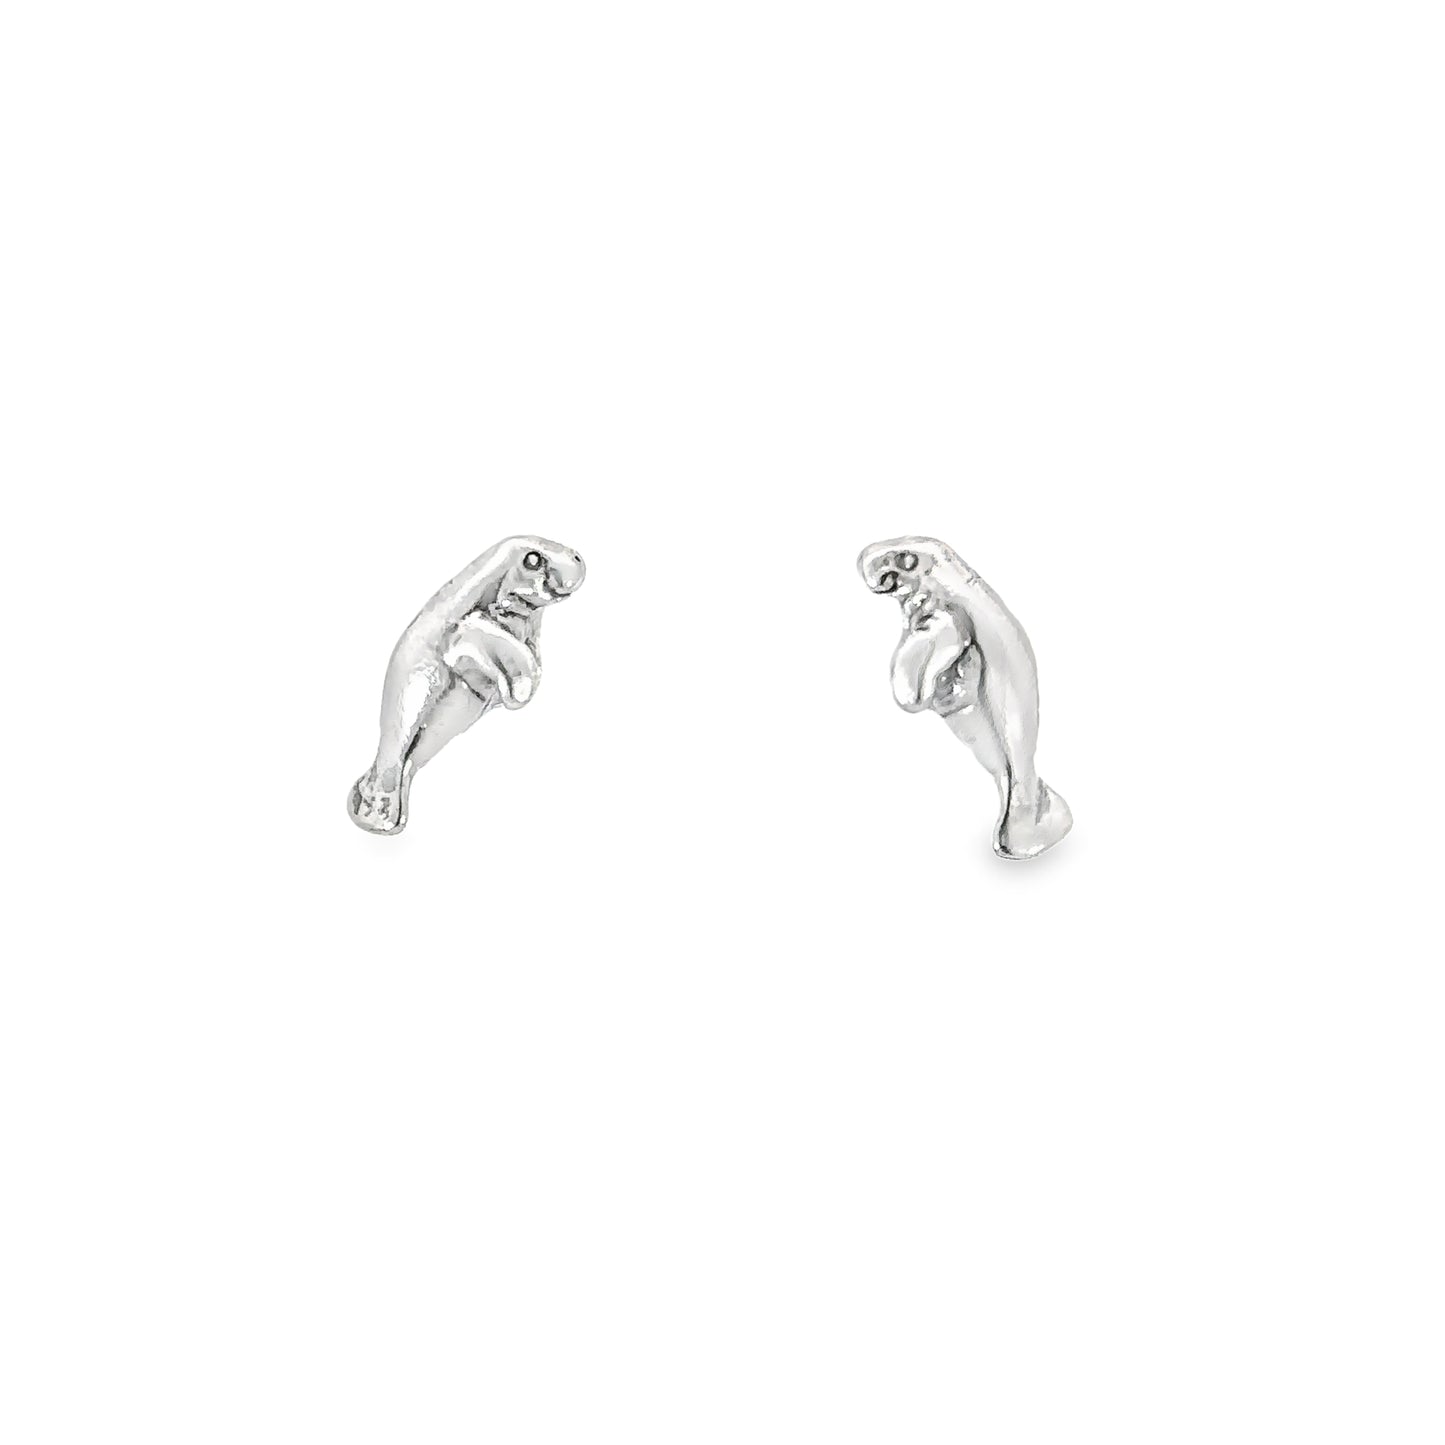 A pair of unique silver Manatee Studs on a white background.